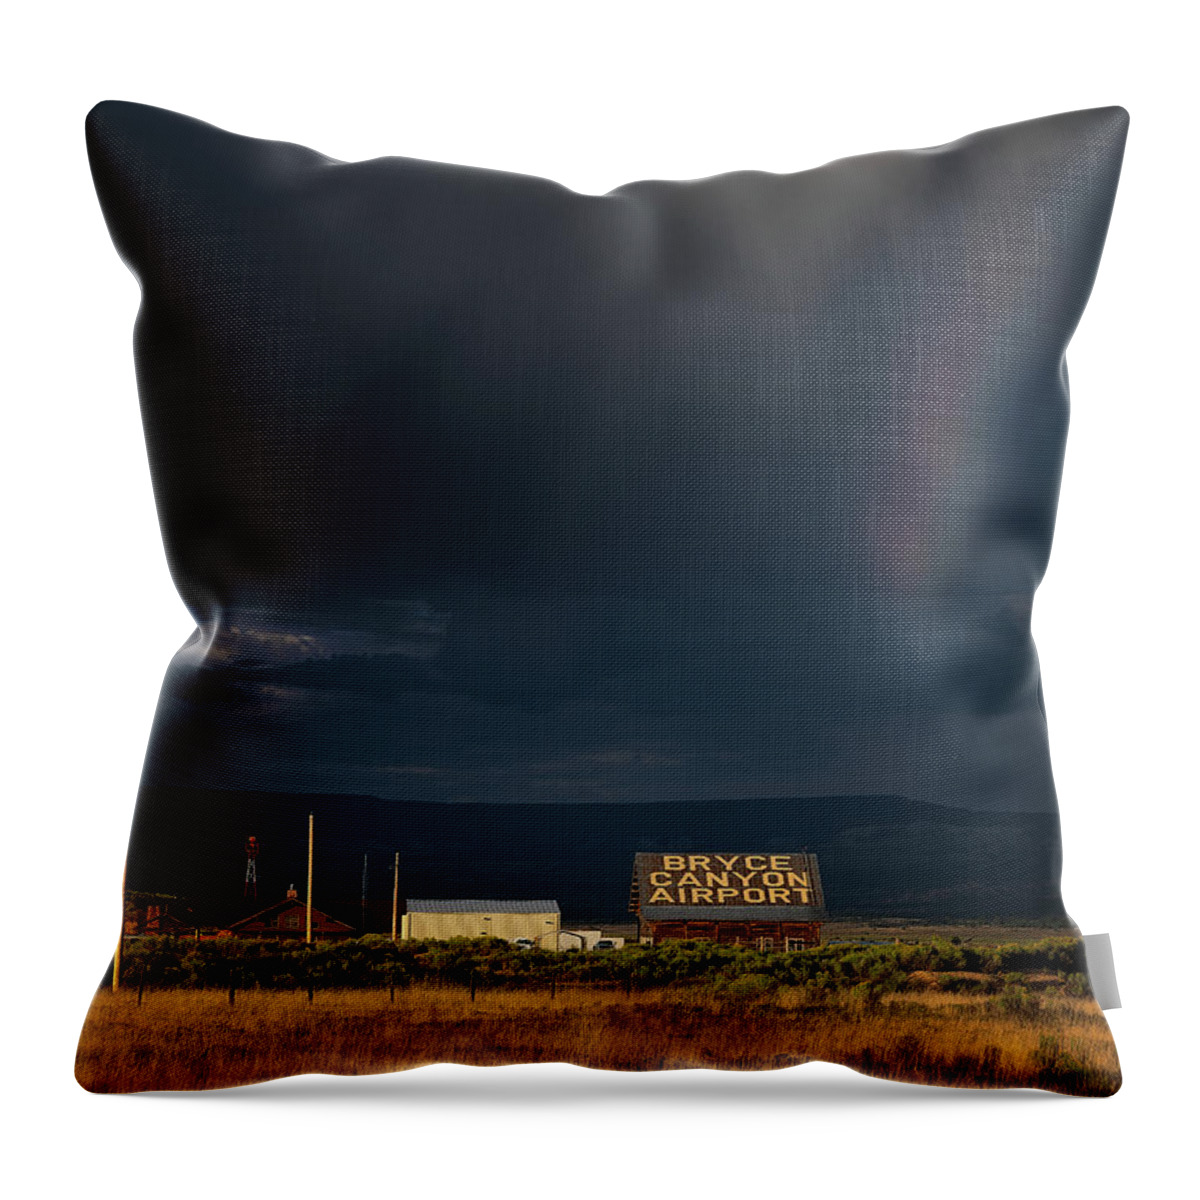 2018 Throw Pillow featuring the photograph Bryce Canyon Airport by Edgars Erglis